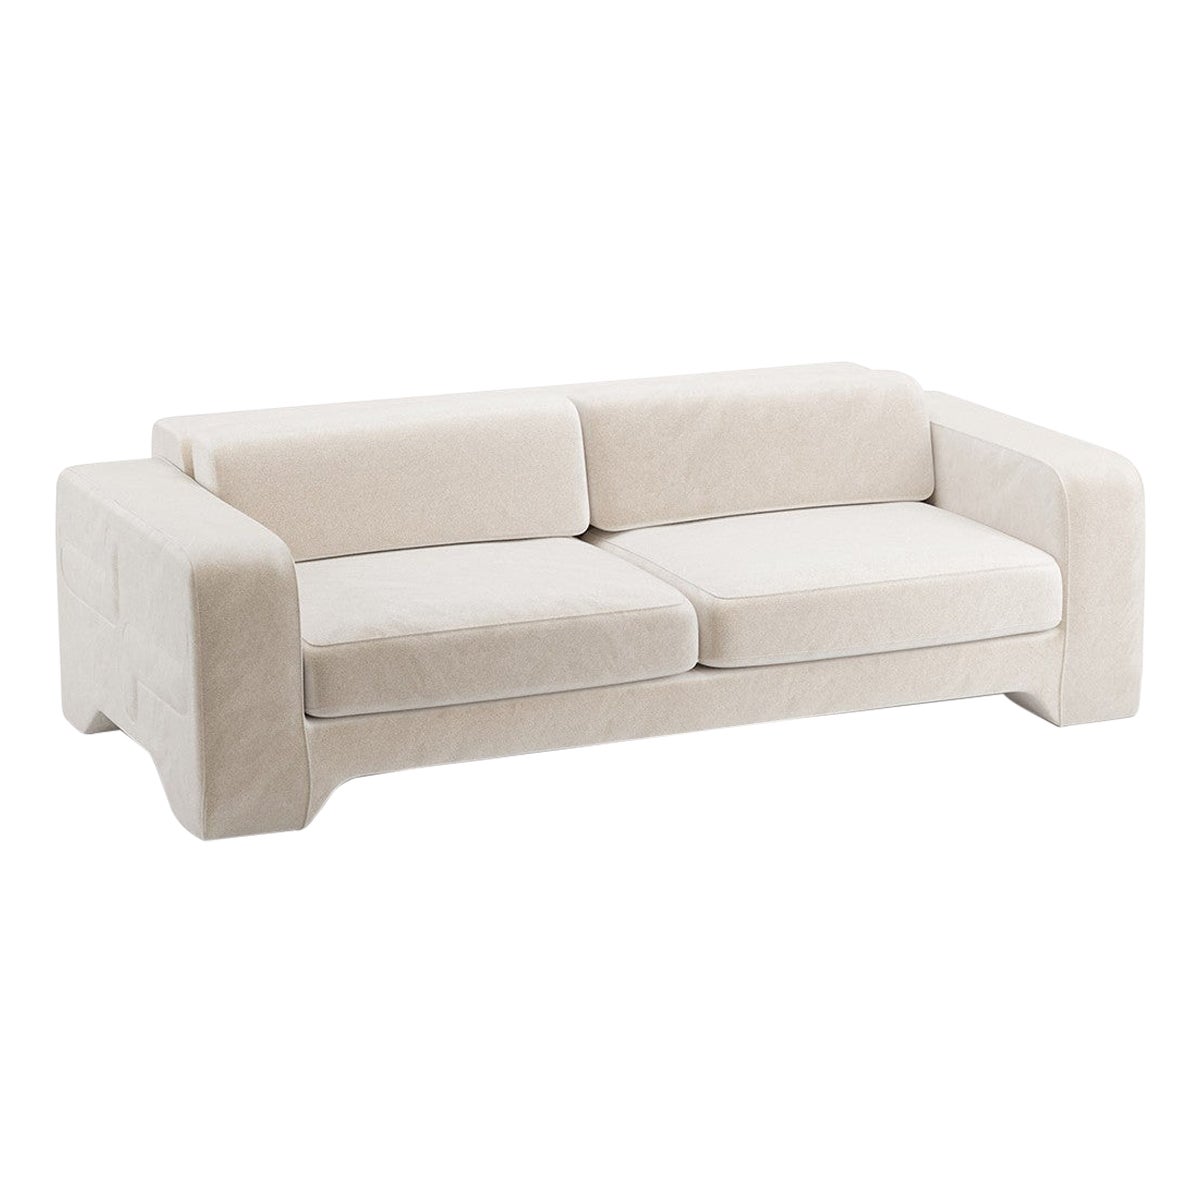 Popus Editions Giovanna 2.5 Seater Sofa in EggShell Off-White Como Velvet Fabric For Sale